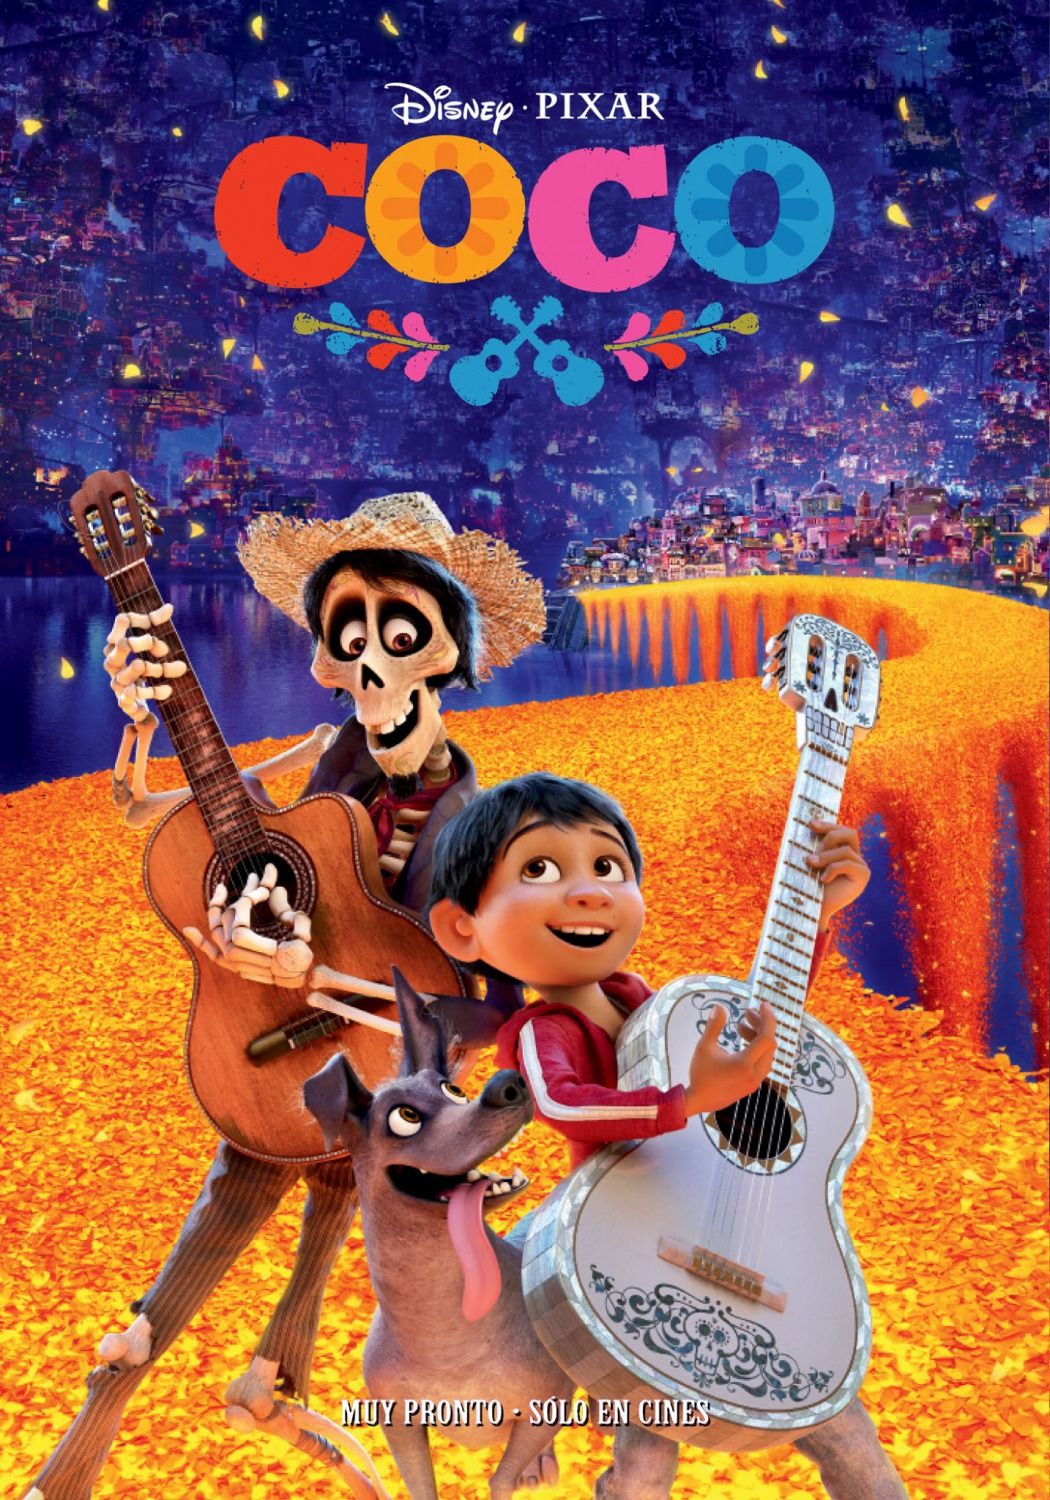 Coco Film by Disney and Pixar